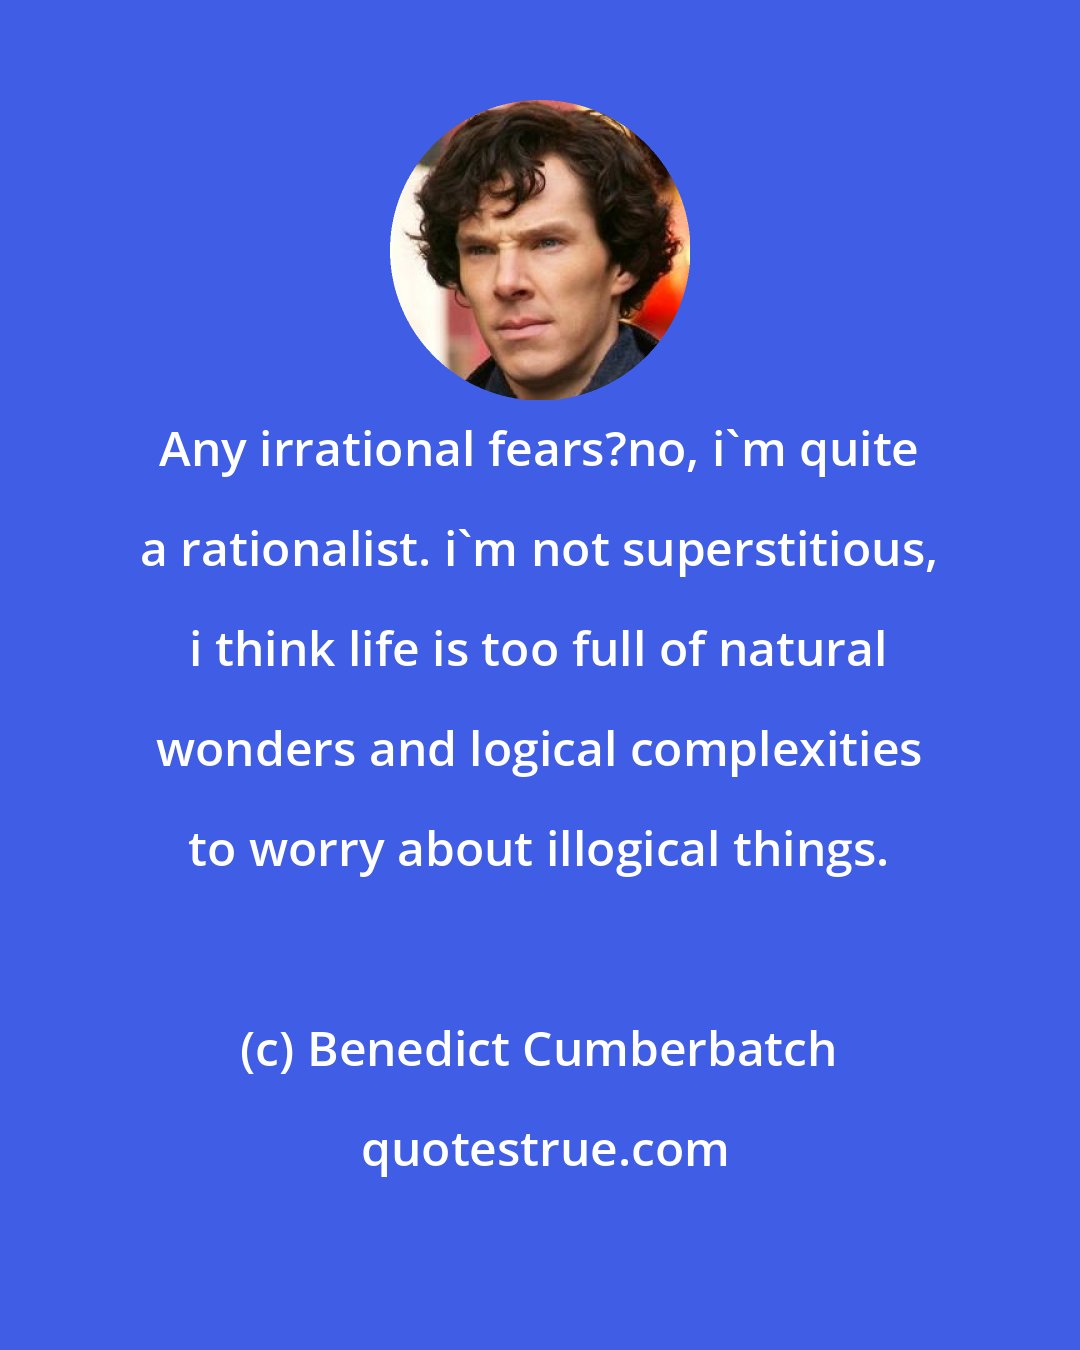 Benedict Cumberbatch: Any irrational fears?no, i'm quite a rationalist. i'm not superstitious, i think life is too full of natural wonders and logical complexities to worry about illogical things.